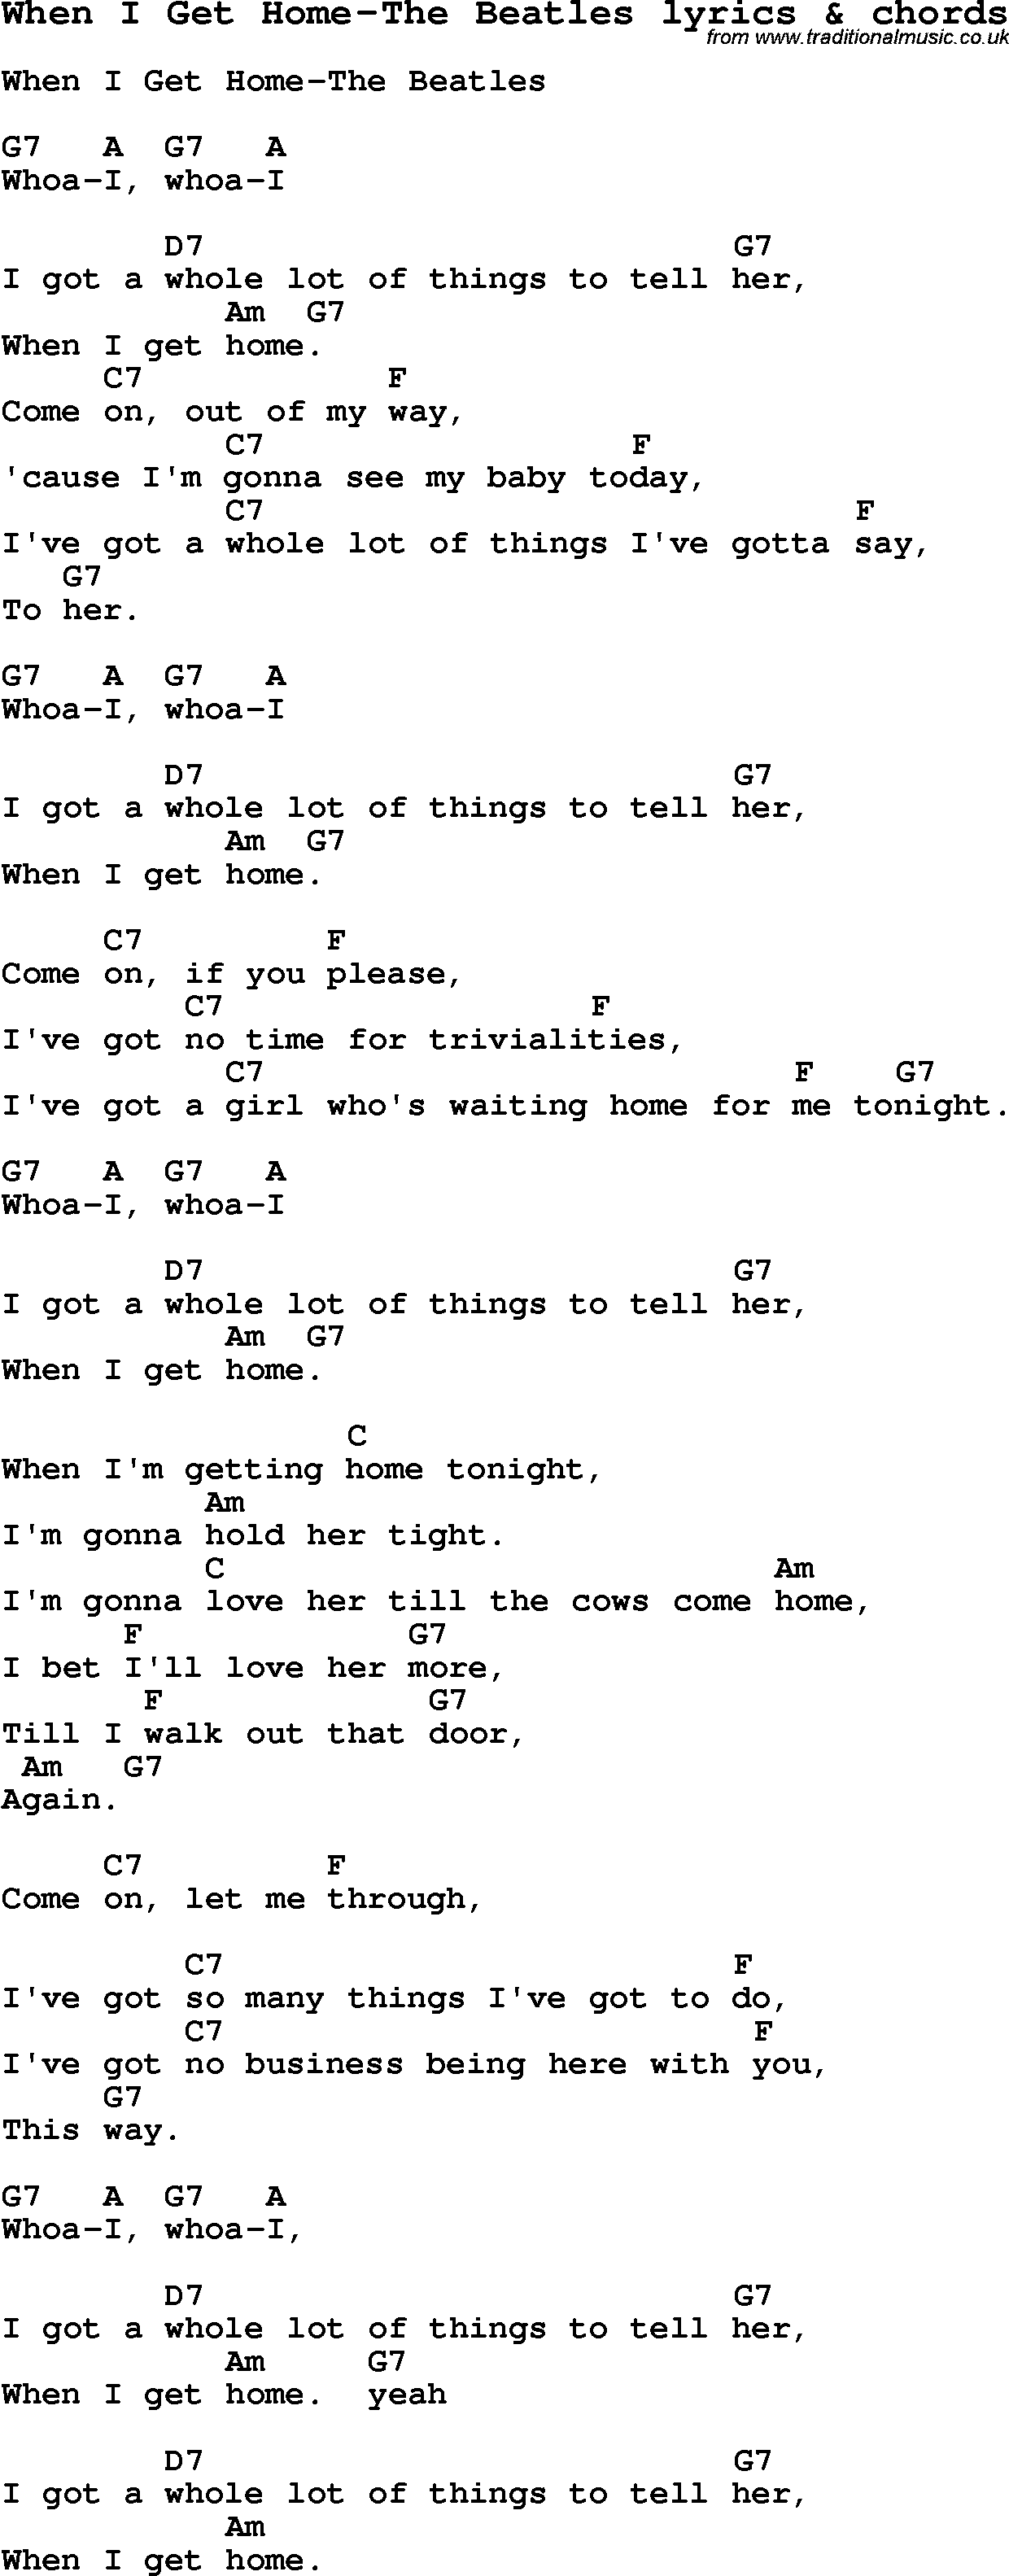 Love Song Lyrics for: When I Get Home-The Beatles with chords for Ukulele, Guitar Banjo etc.